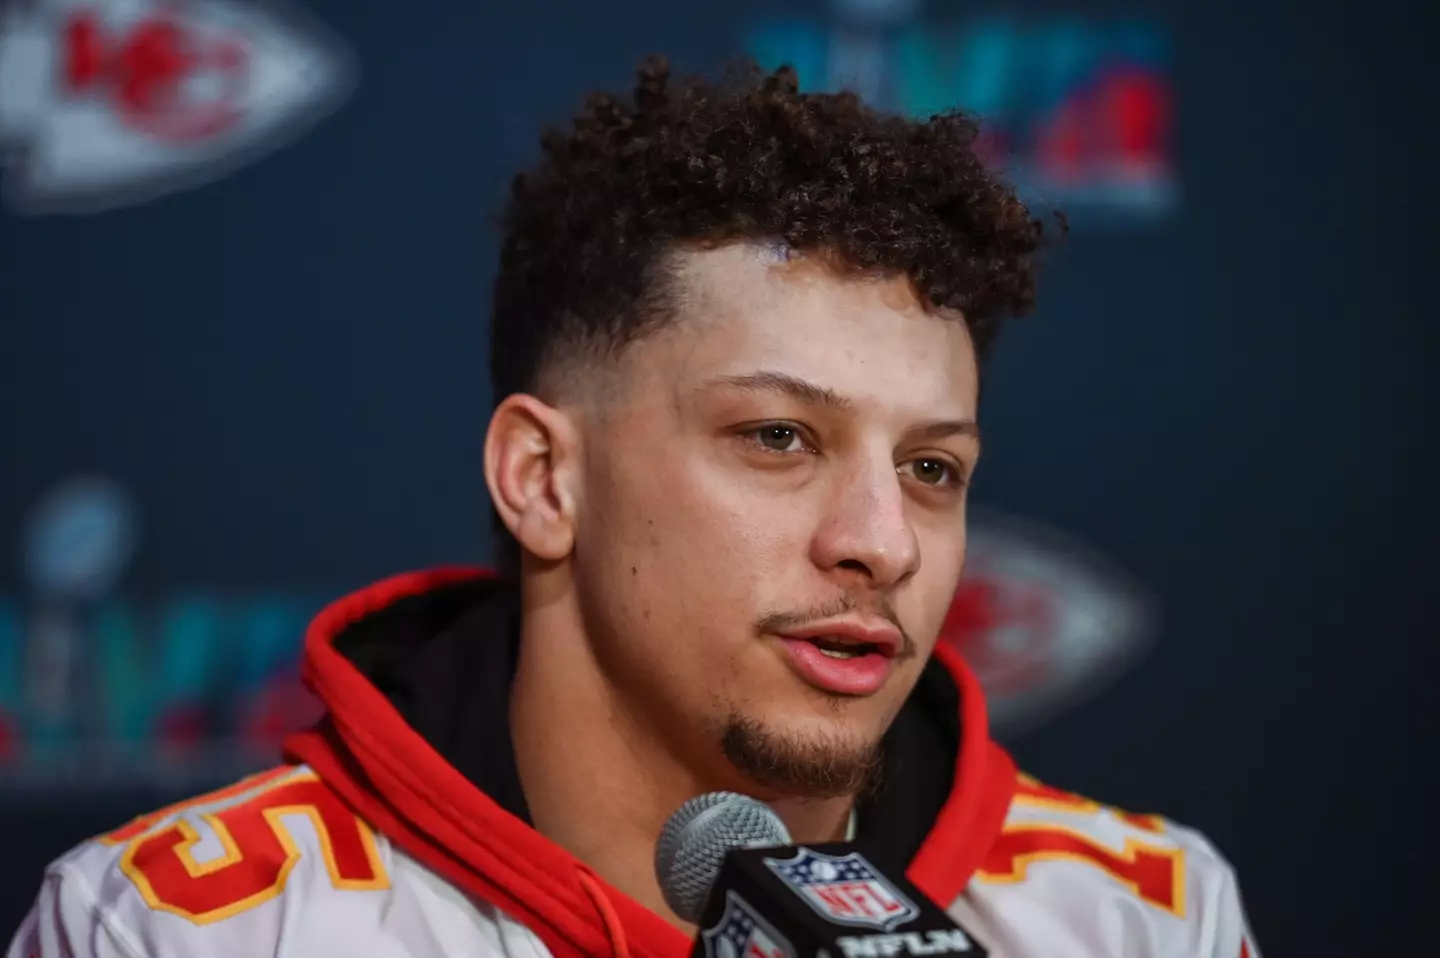 Patrick Mahomes is set to compete in the Super Bowl this weekend.